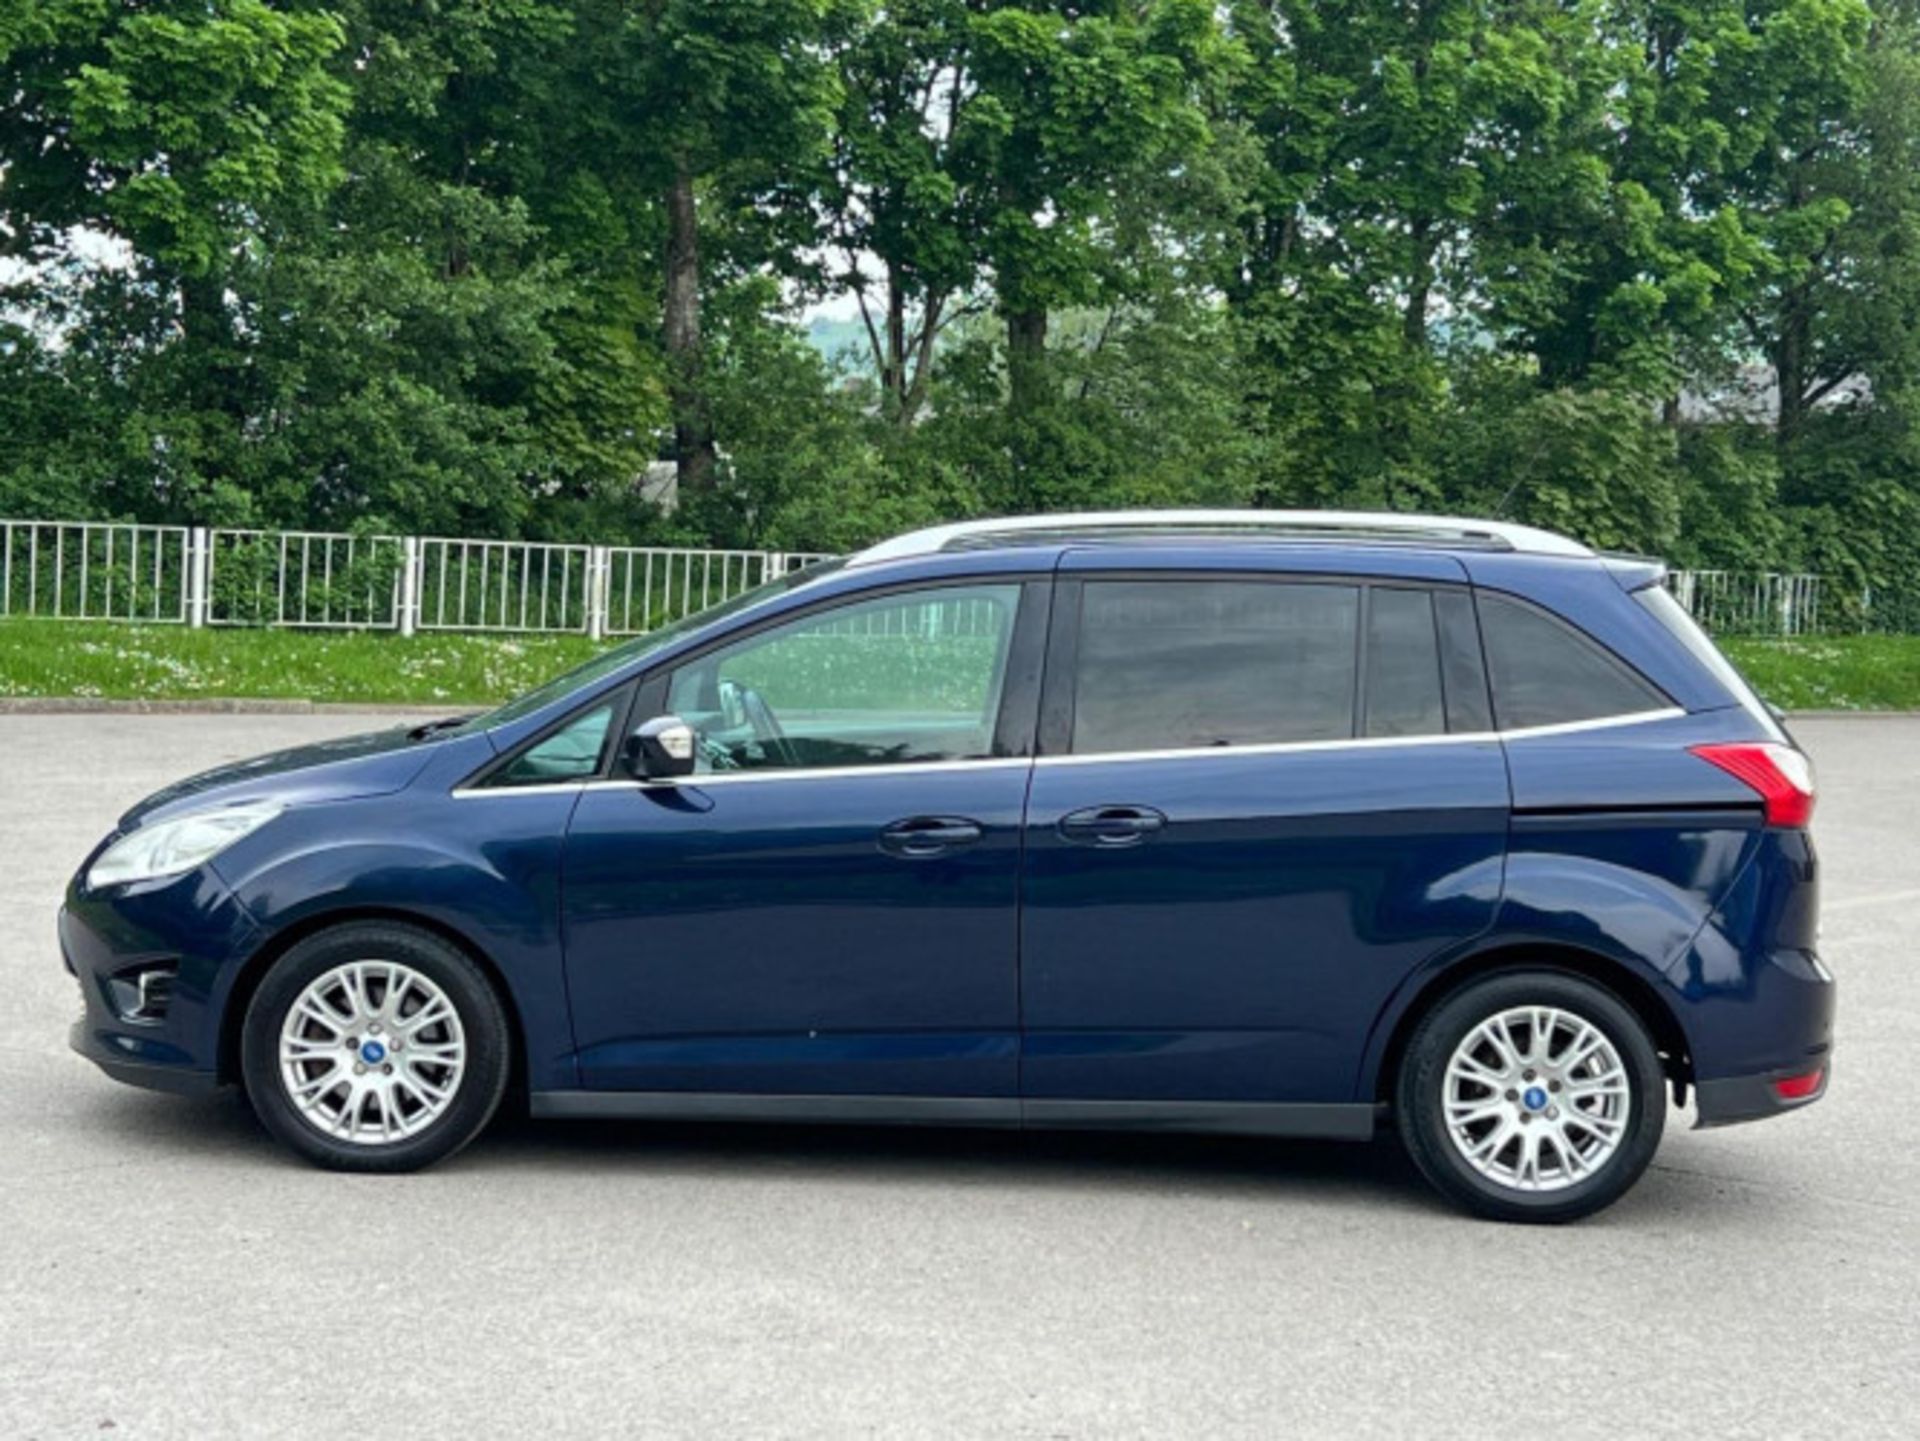 STYLISH AND SPACIOUS 2011 FORD GRAND C-MAX 1.6 TDCI >>--NO VAT ON HAMMER--<< - Image 3 of 136